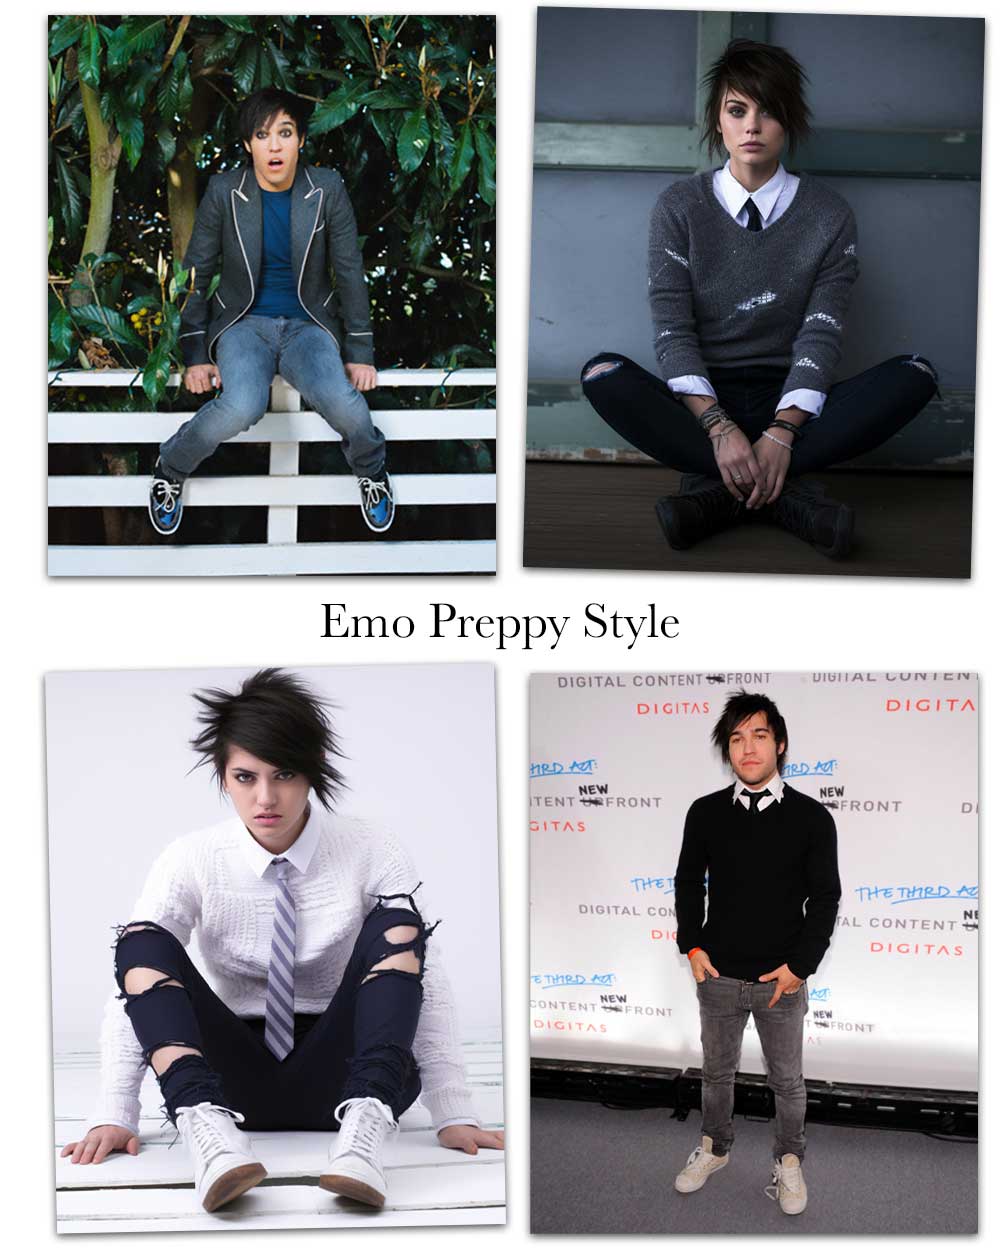 Emo Preppy Style fashion and outfits